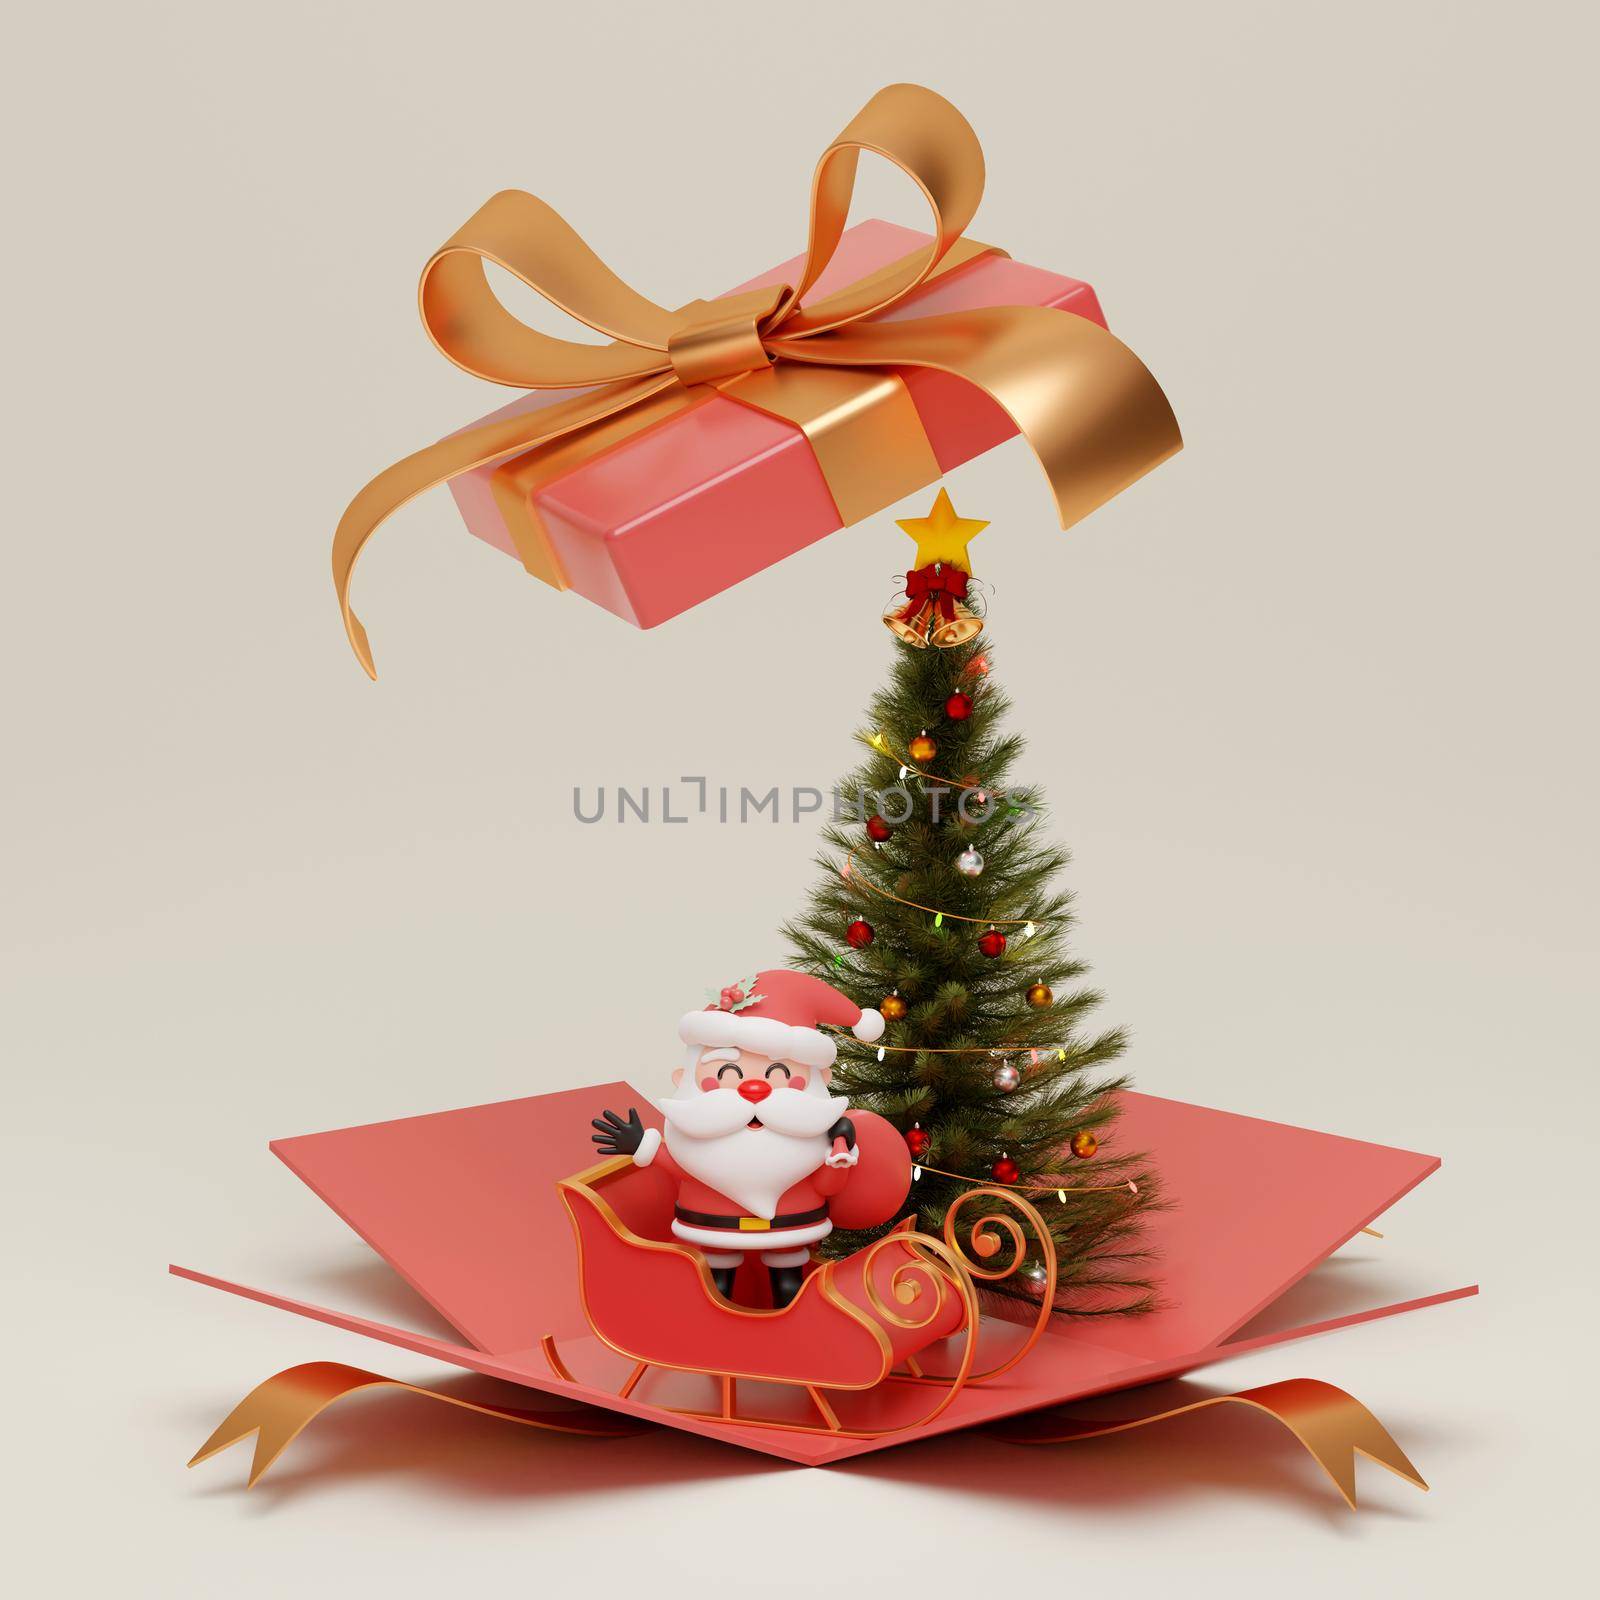 Santa Claus on sleigh with Christmas tree in opened gift box by nutzchotwarut